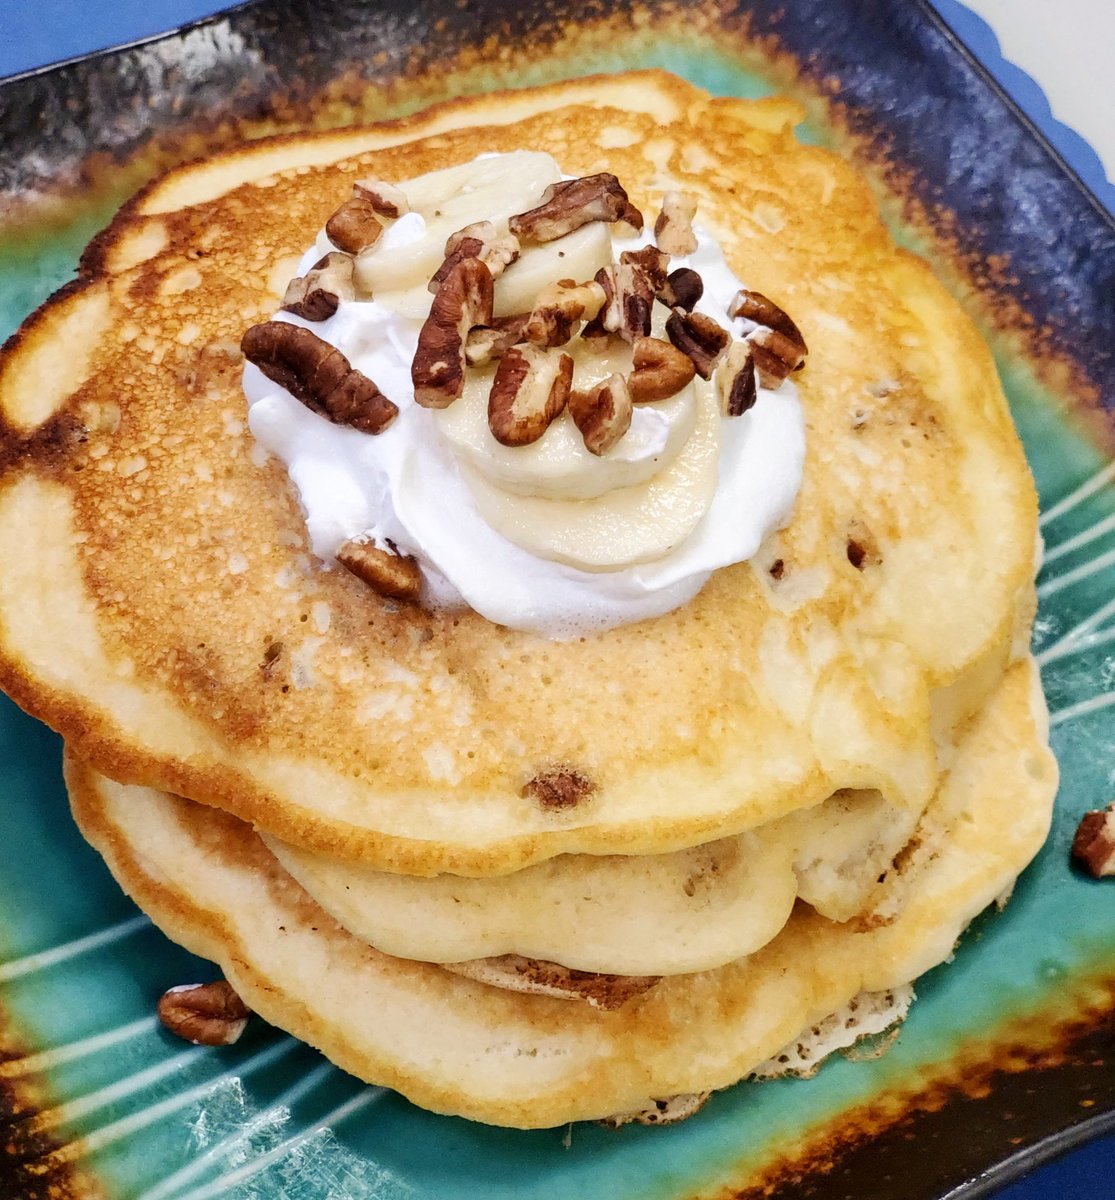 Who can say no to banana pancakes? Not me! Our special today is Banana Walnut Pancakes, with Whipped Cream on top! Come in while supplies last!
#todaysspecial #bananawalnutpancakes #pancakesforbreakfast #breakfast #conniescafe #cafe #localcafe #vistaca #vista #eatlocal